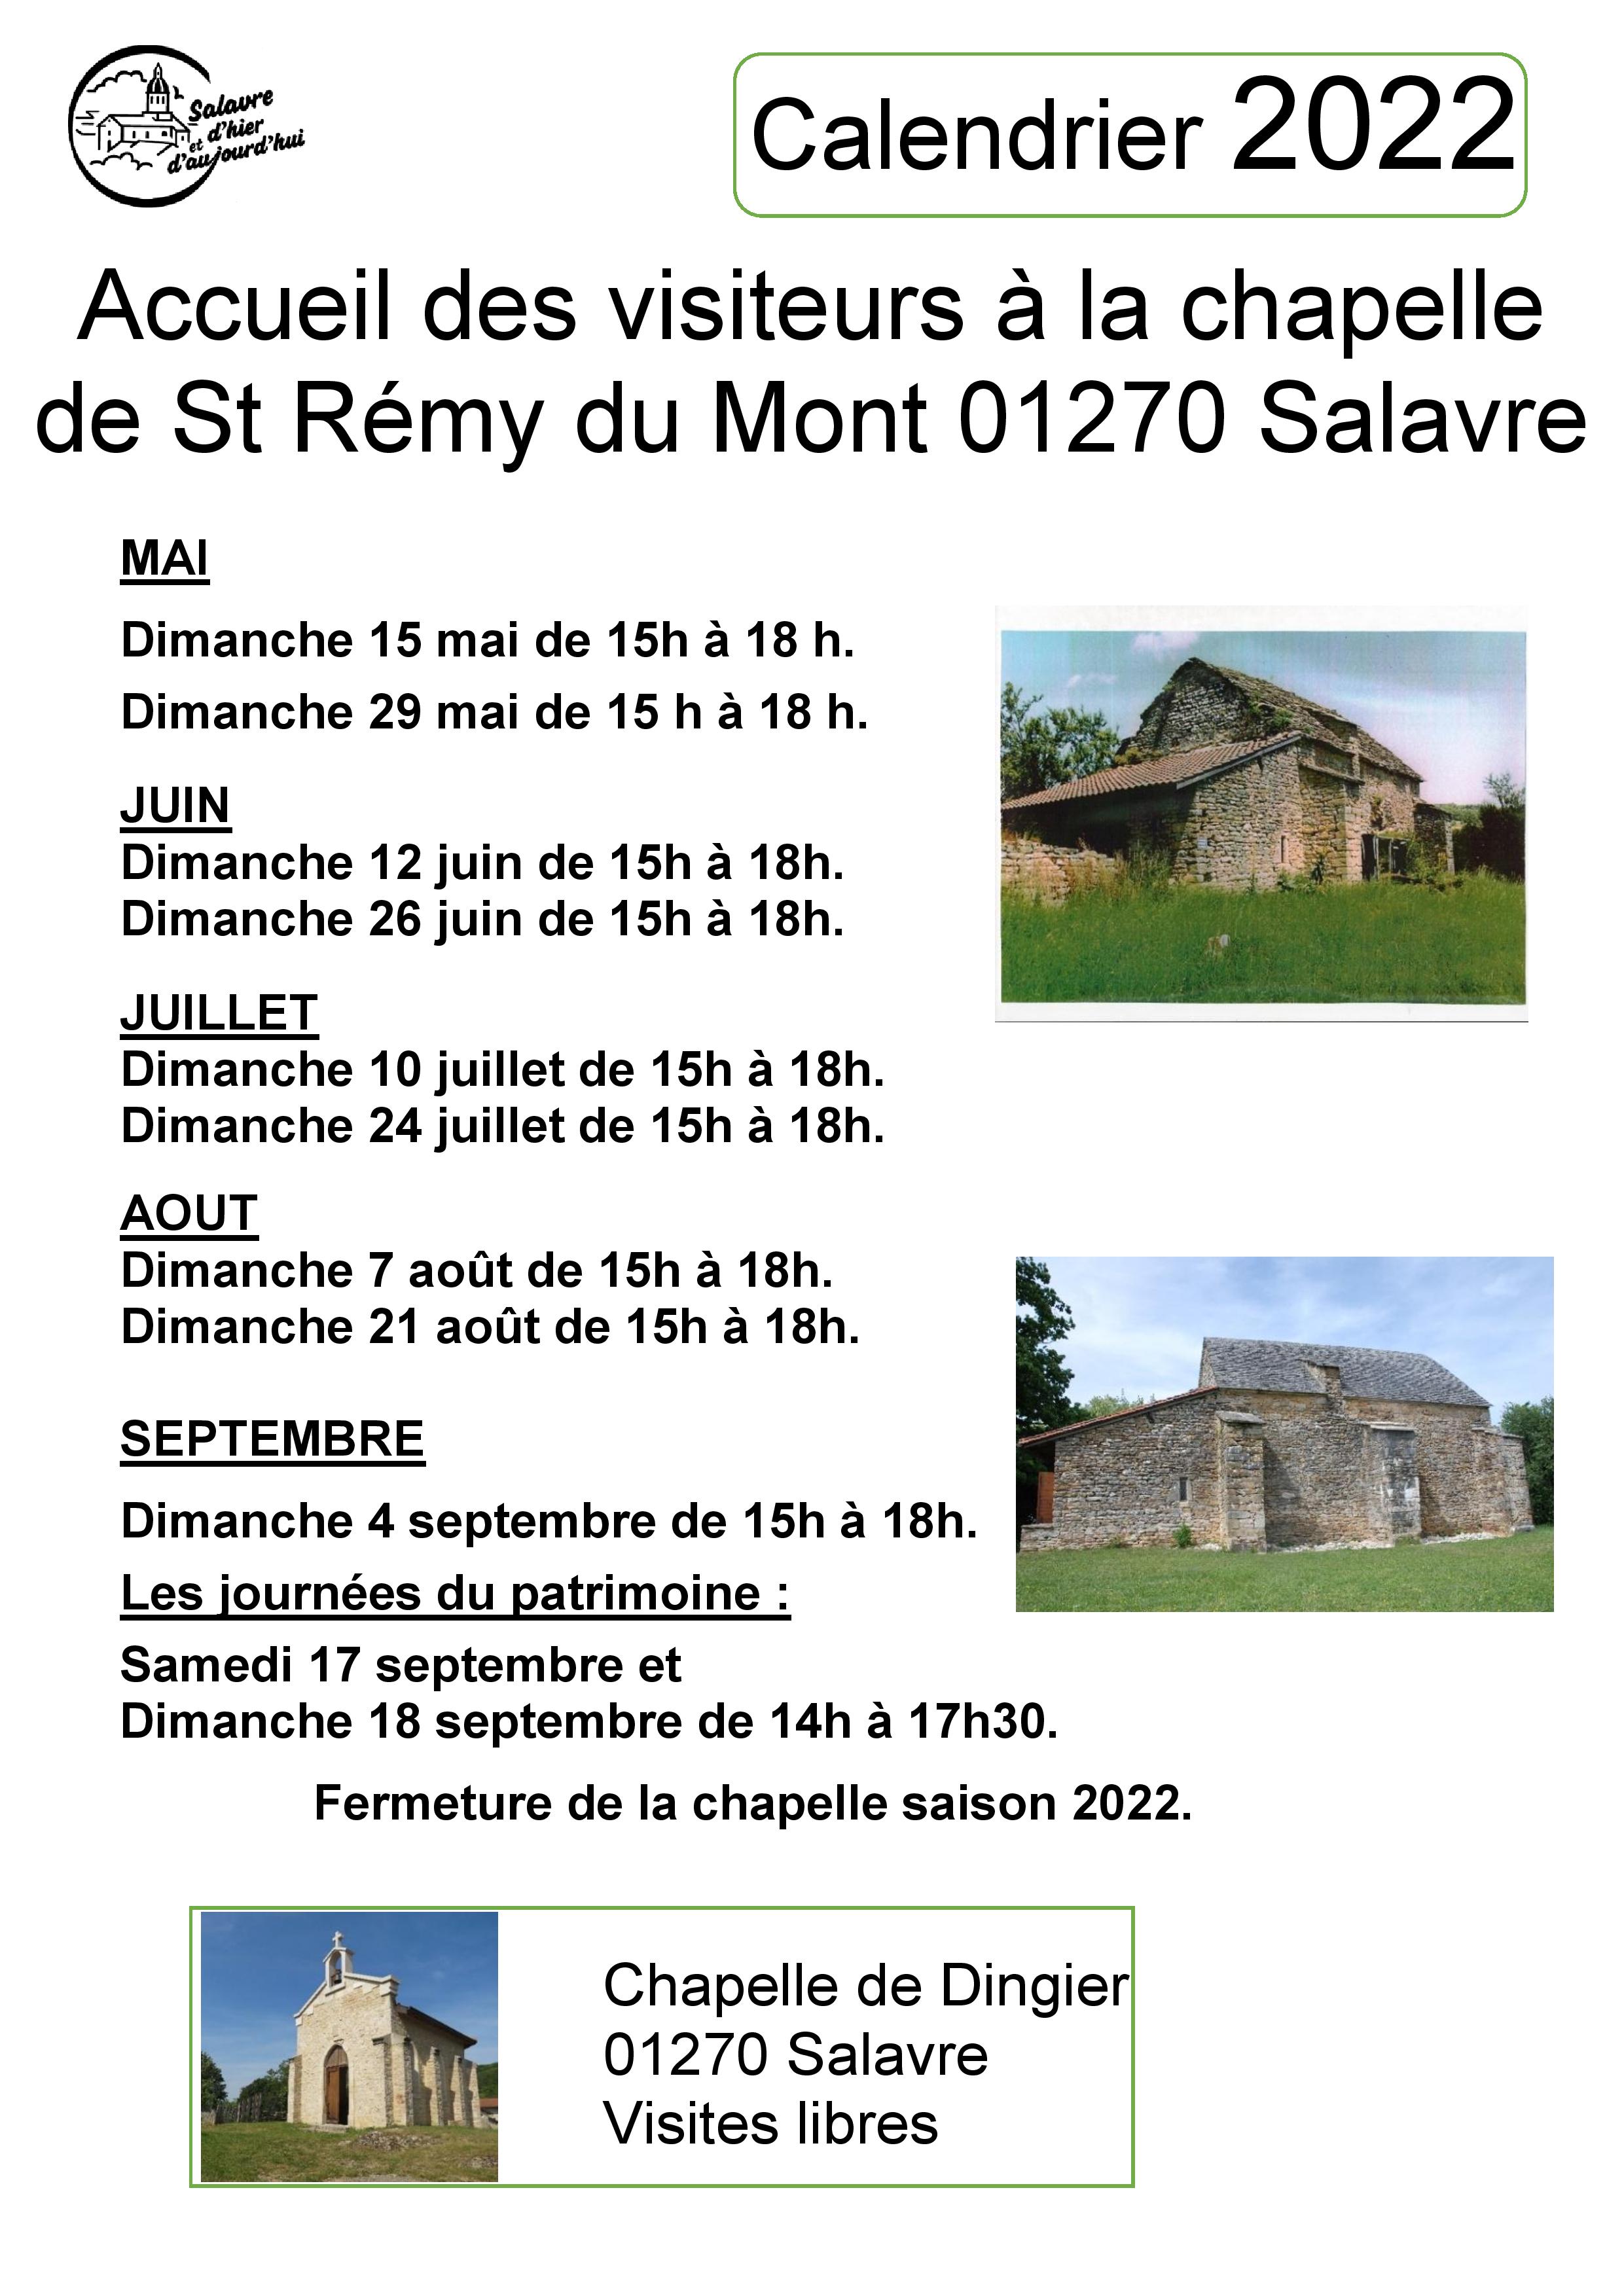 Calendrier Chapelle 2022 1 page 001